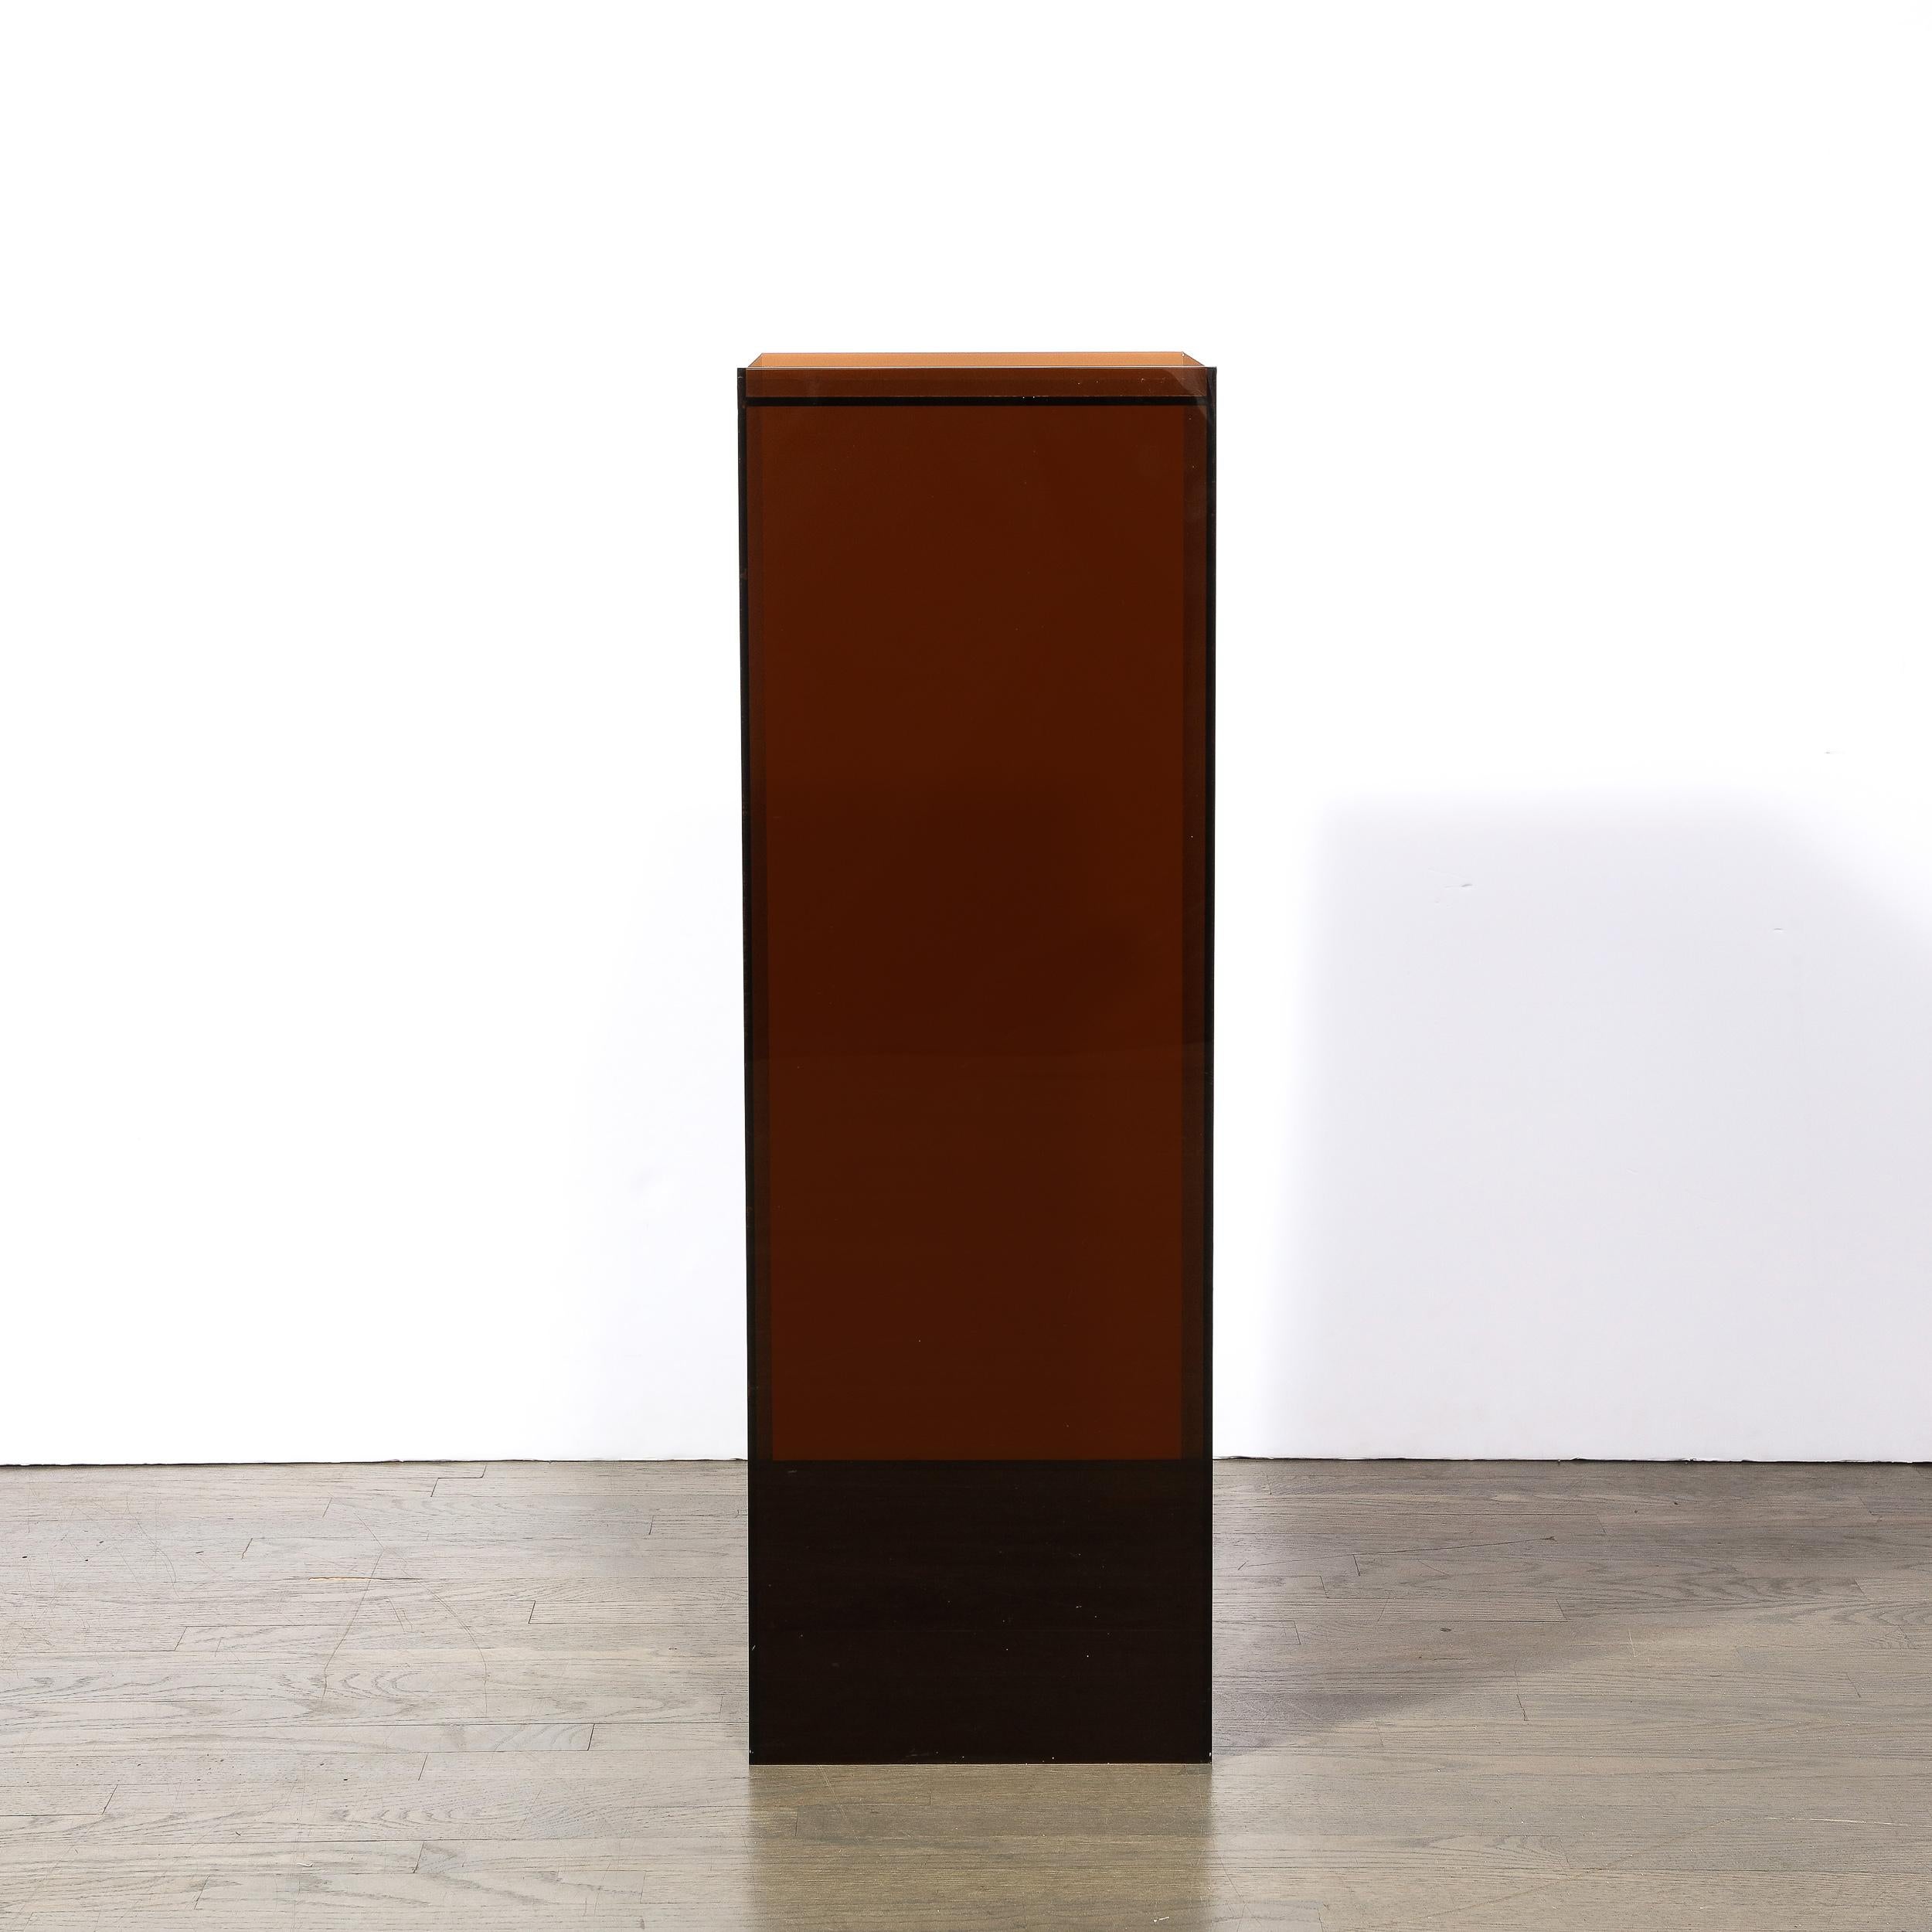 This sophisticated modernist pedestal was realized in the United States circa 1980. It features a volumetric rectangular body with an inset mirror top in a sexy and sumptuous smoked bronze lucite. With its clean modernist lines, this piece is as